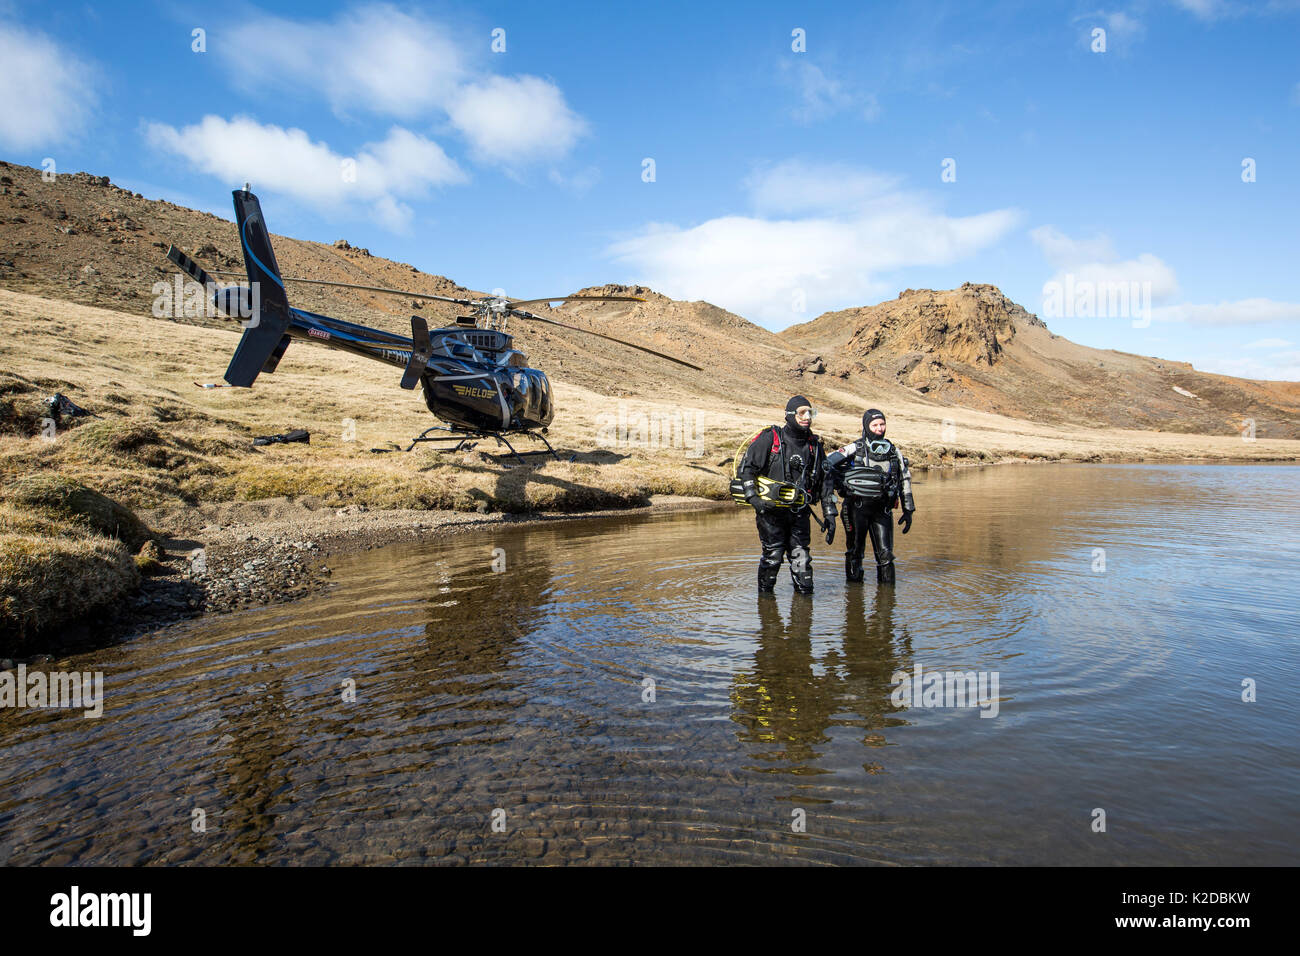 Heli-diving, going into the water for a scouting scuba dive in a mountain lake, Iceland Stock Photo